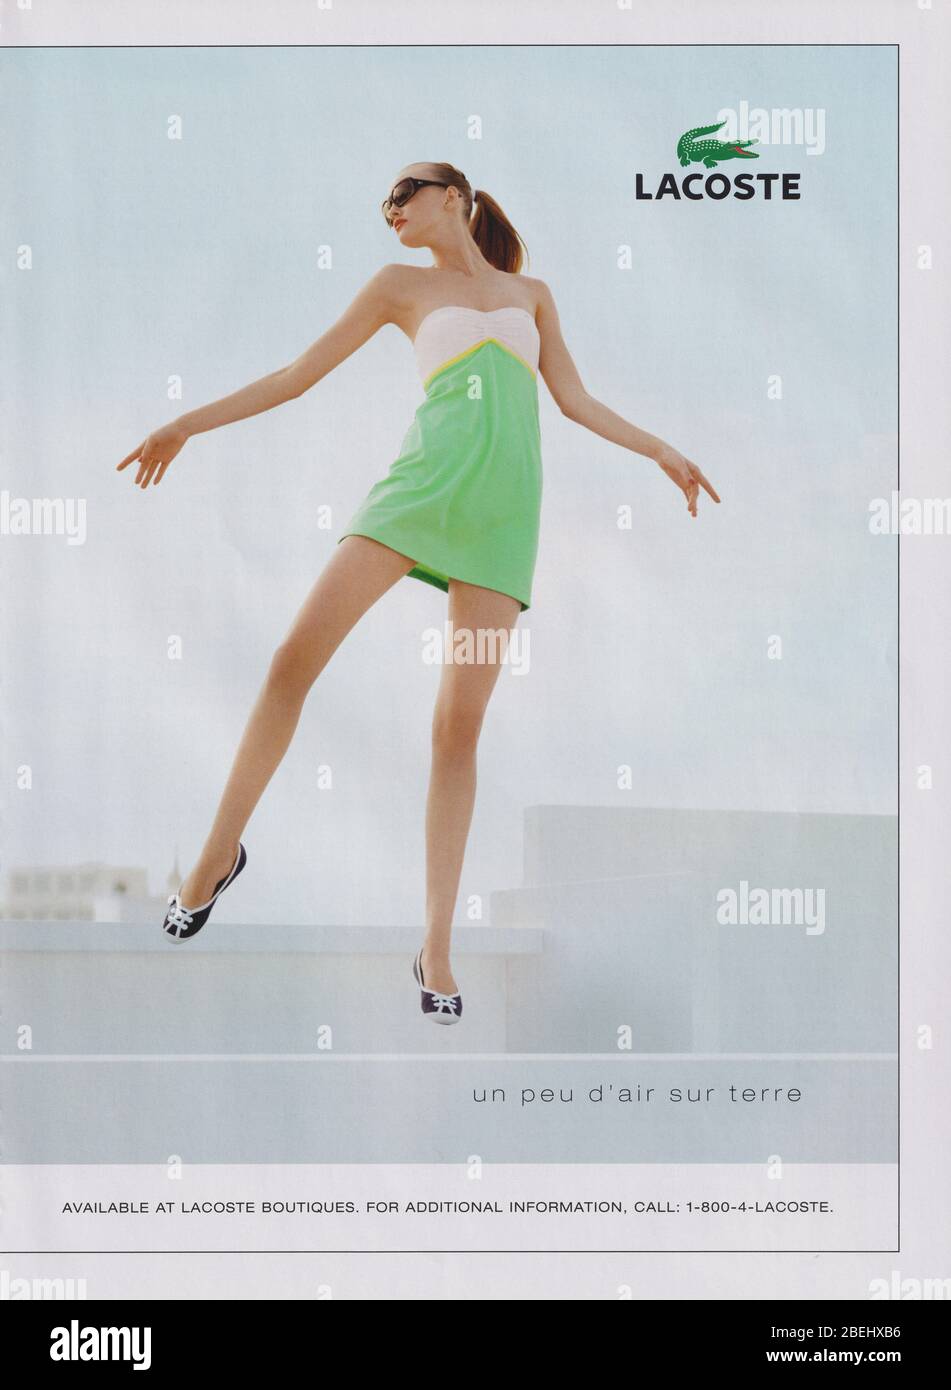 poster advertising Lacoste fashion house in paper magazine from 2007 year,  advertisement, creative Lacoste advert from 2000s Stock Photo - Alamy